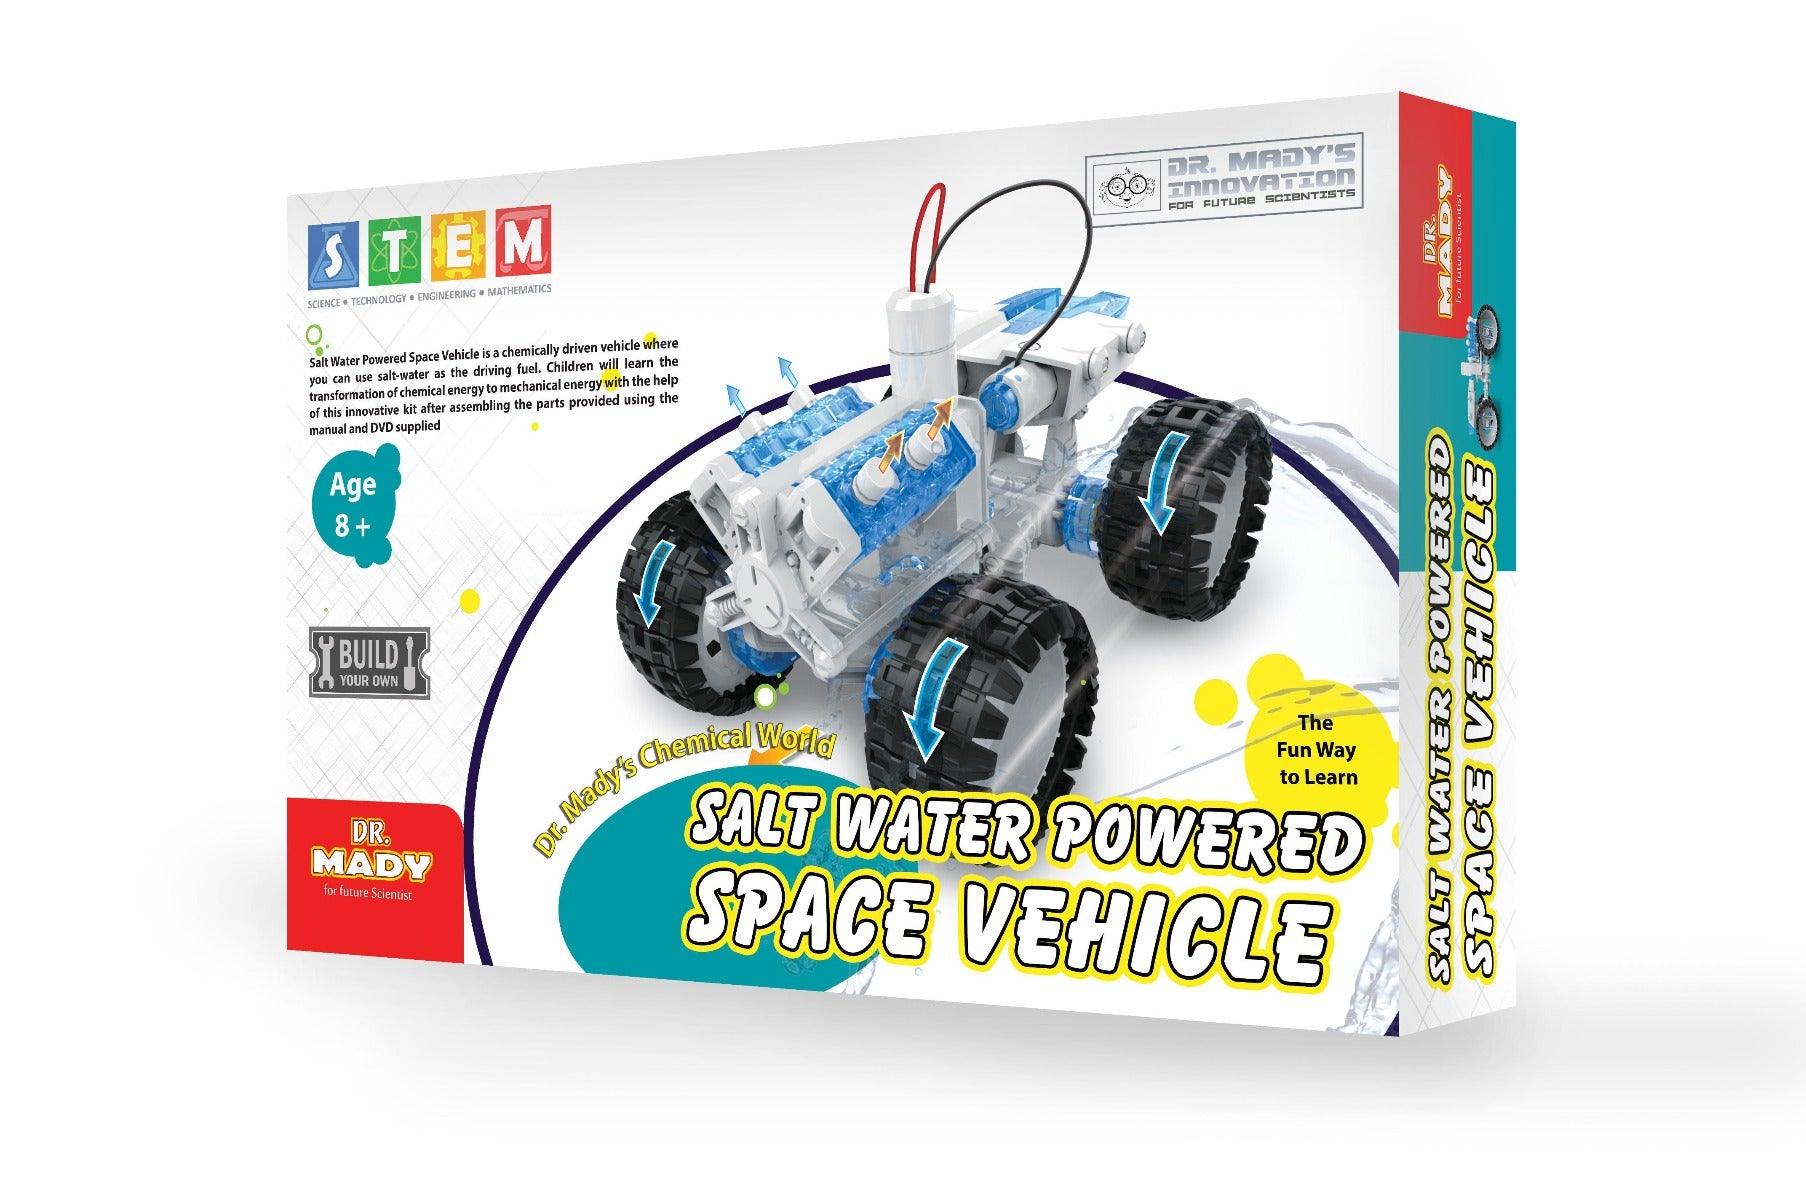 Dr. Mady Salt Water Powered Space Vehicle